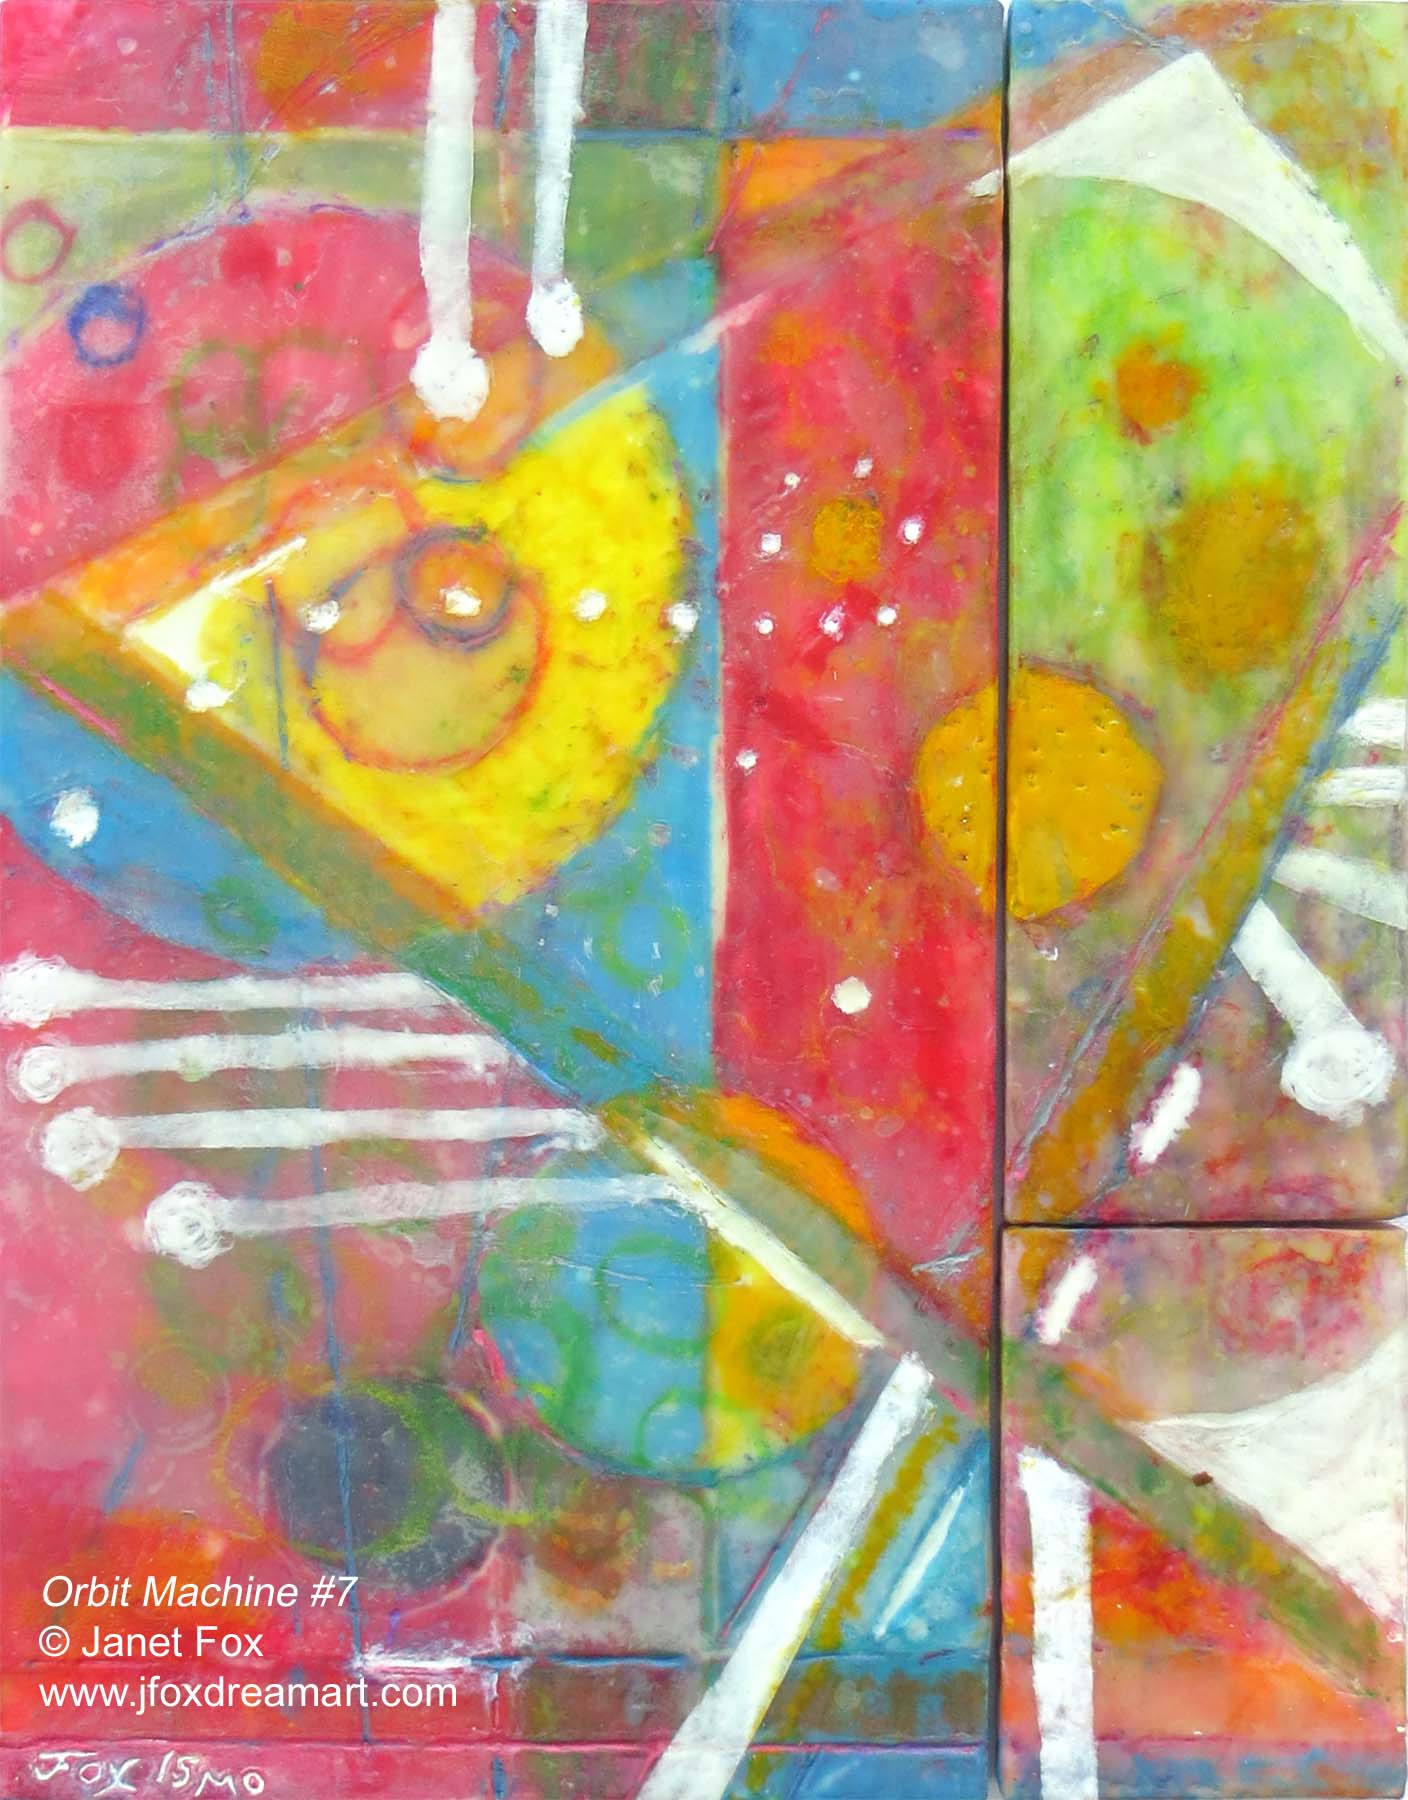 Image of an encaustic painting by Janet Fox titled "Orbit Machine #7."